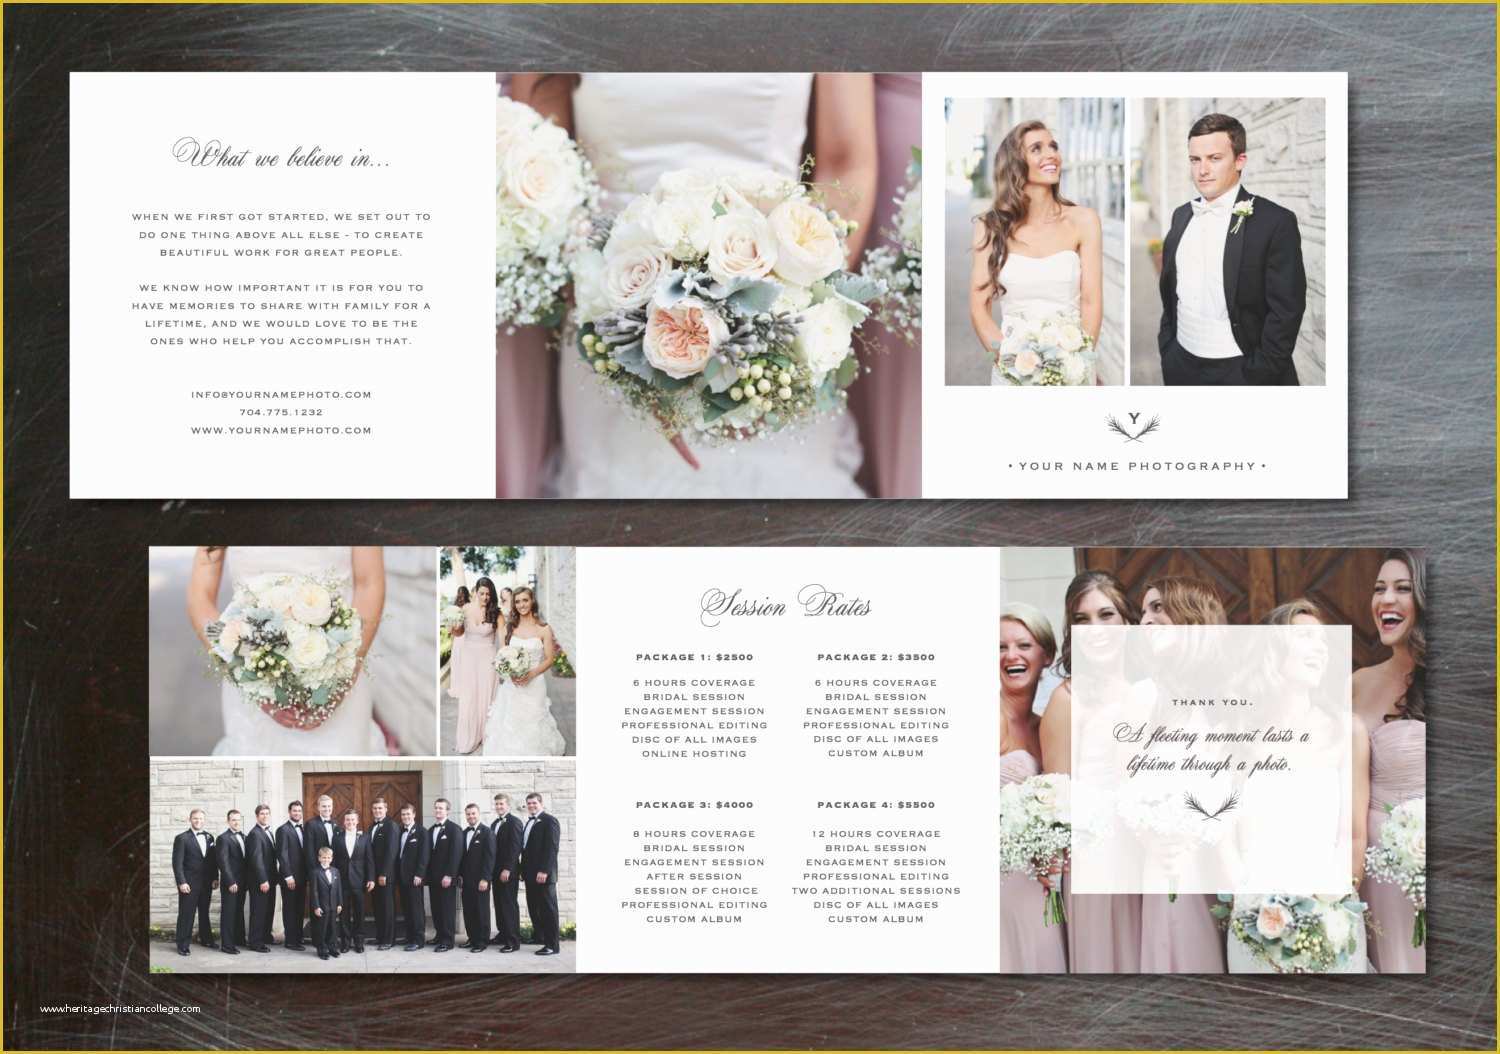 Wedding Photography Pricing Template Free Of Template Trifold Pricing Guide Brochure Templates On